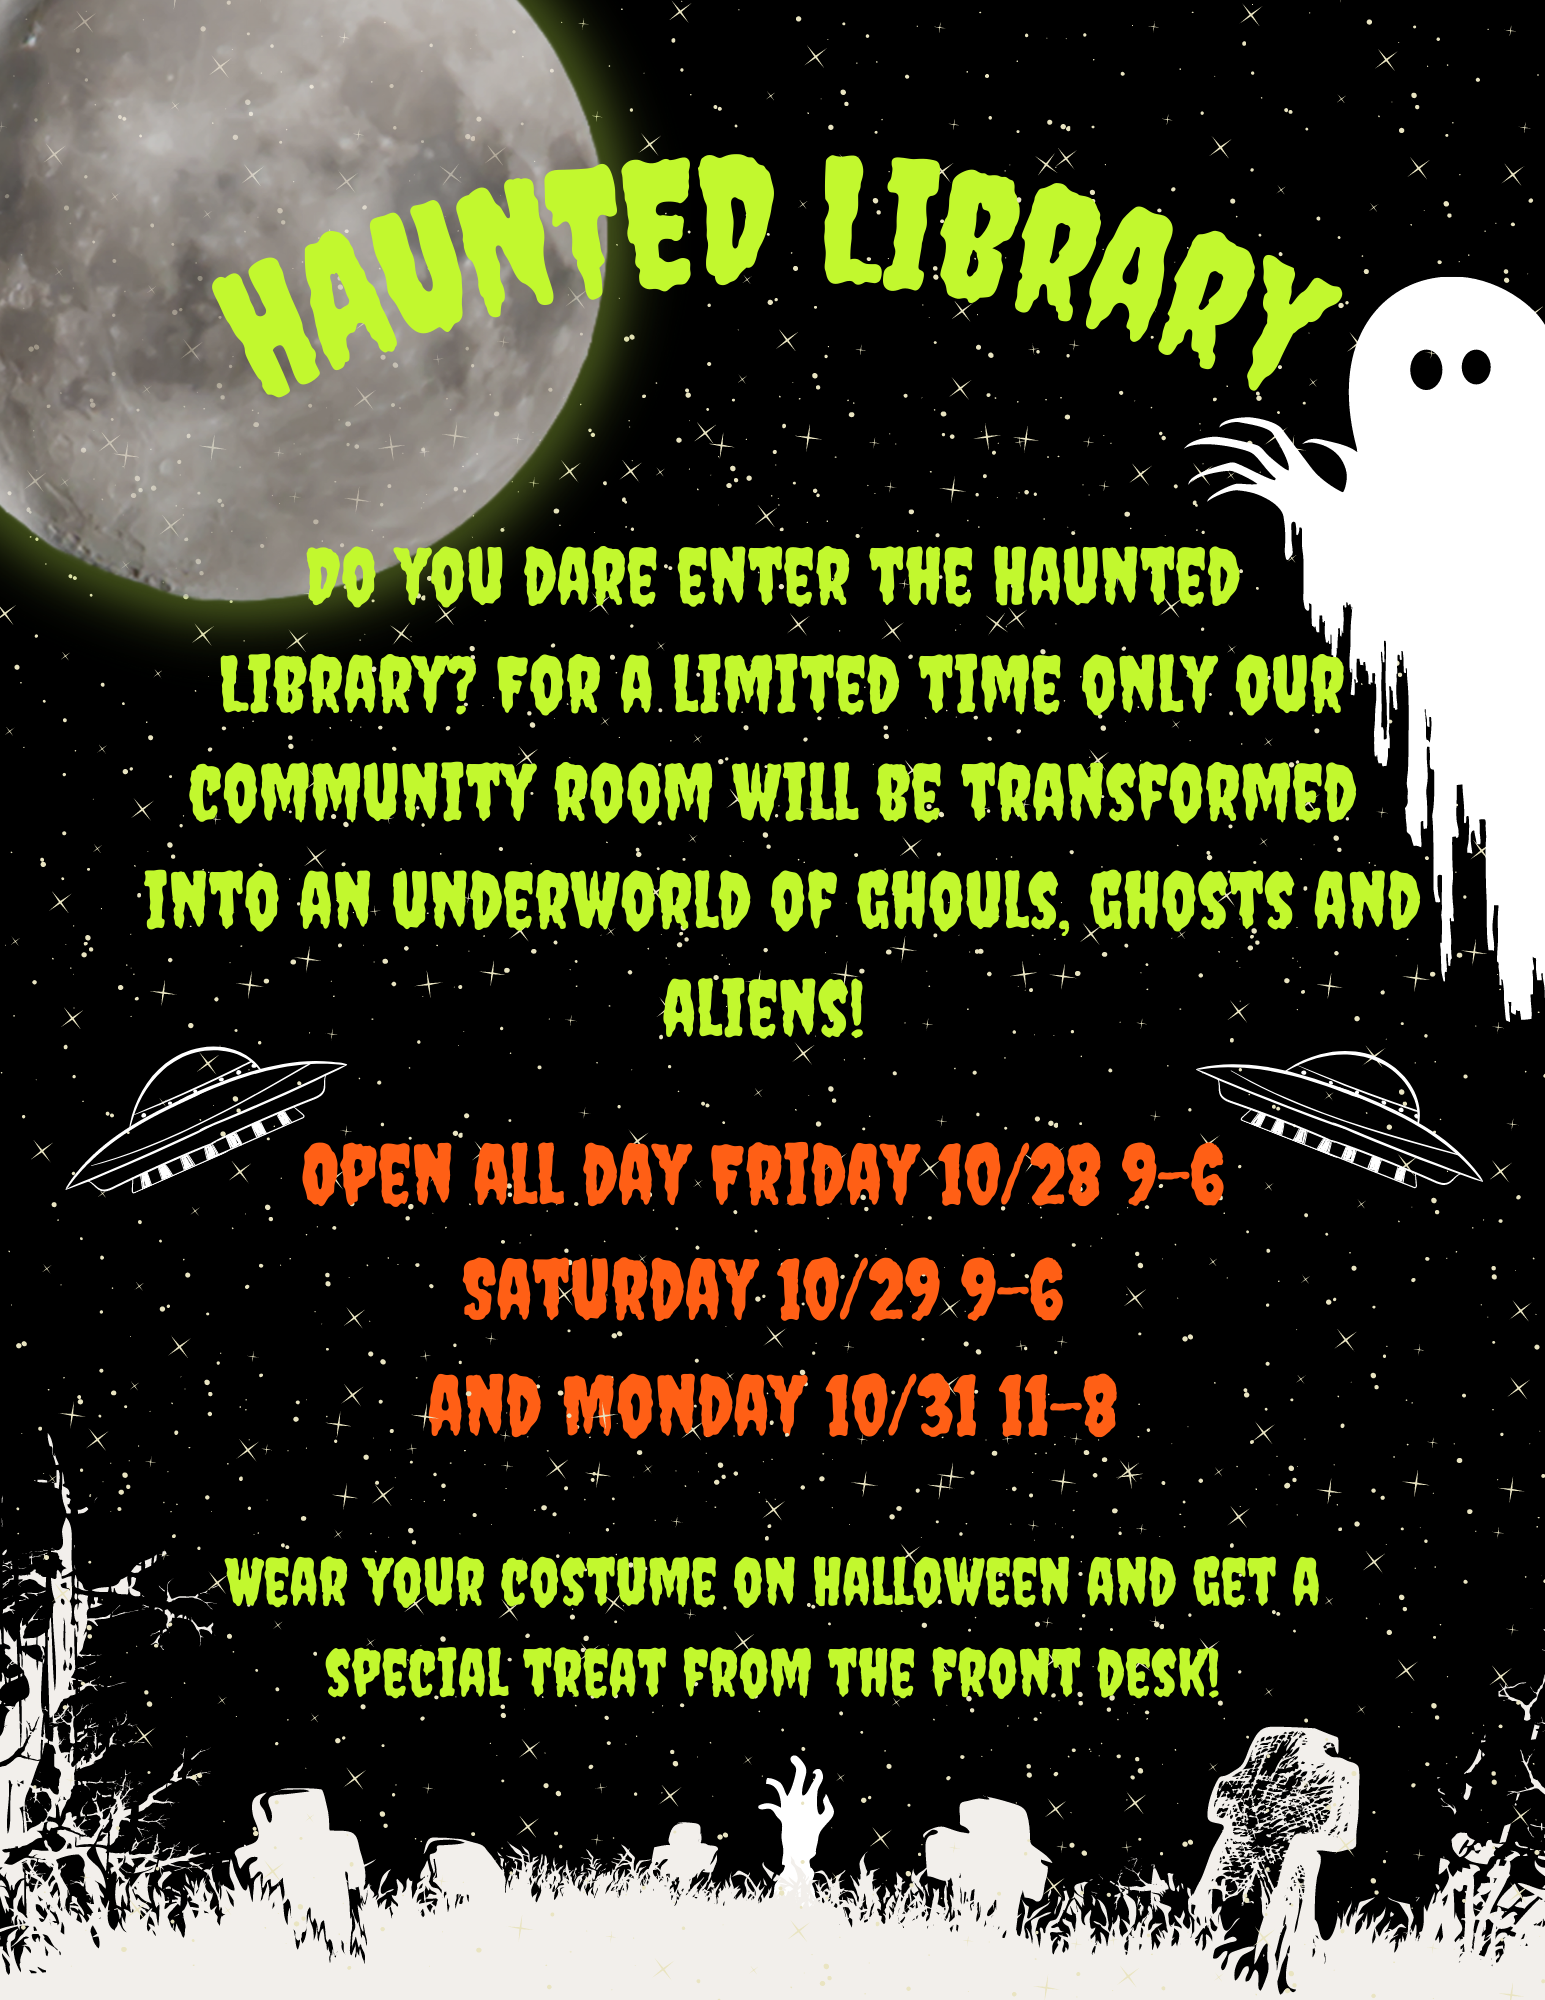 Do You dare Enter the Haunted Library? For a limited time only our community room will be transformed into an underworld of ghouls, ghosts and aliens! Open all Friday 10/26 9:30am to 6pm, Saturday 9:30am to 6, and Monday 10/31 11:30am to 8pm. Wear your costume on Halloween and get a special treat from the front desk! 